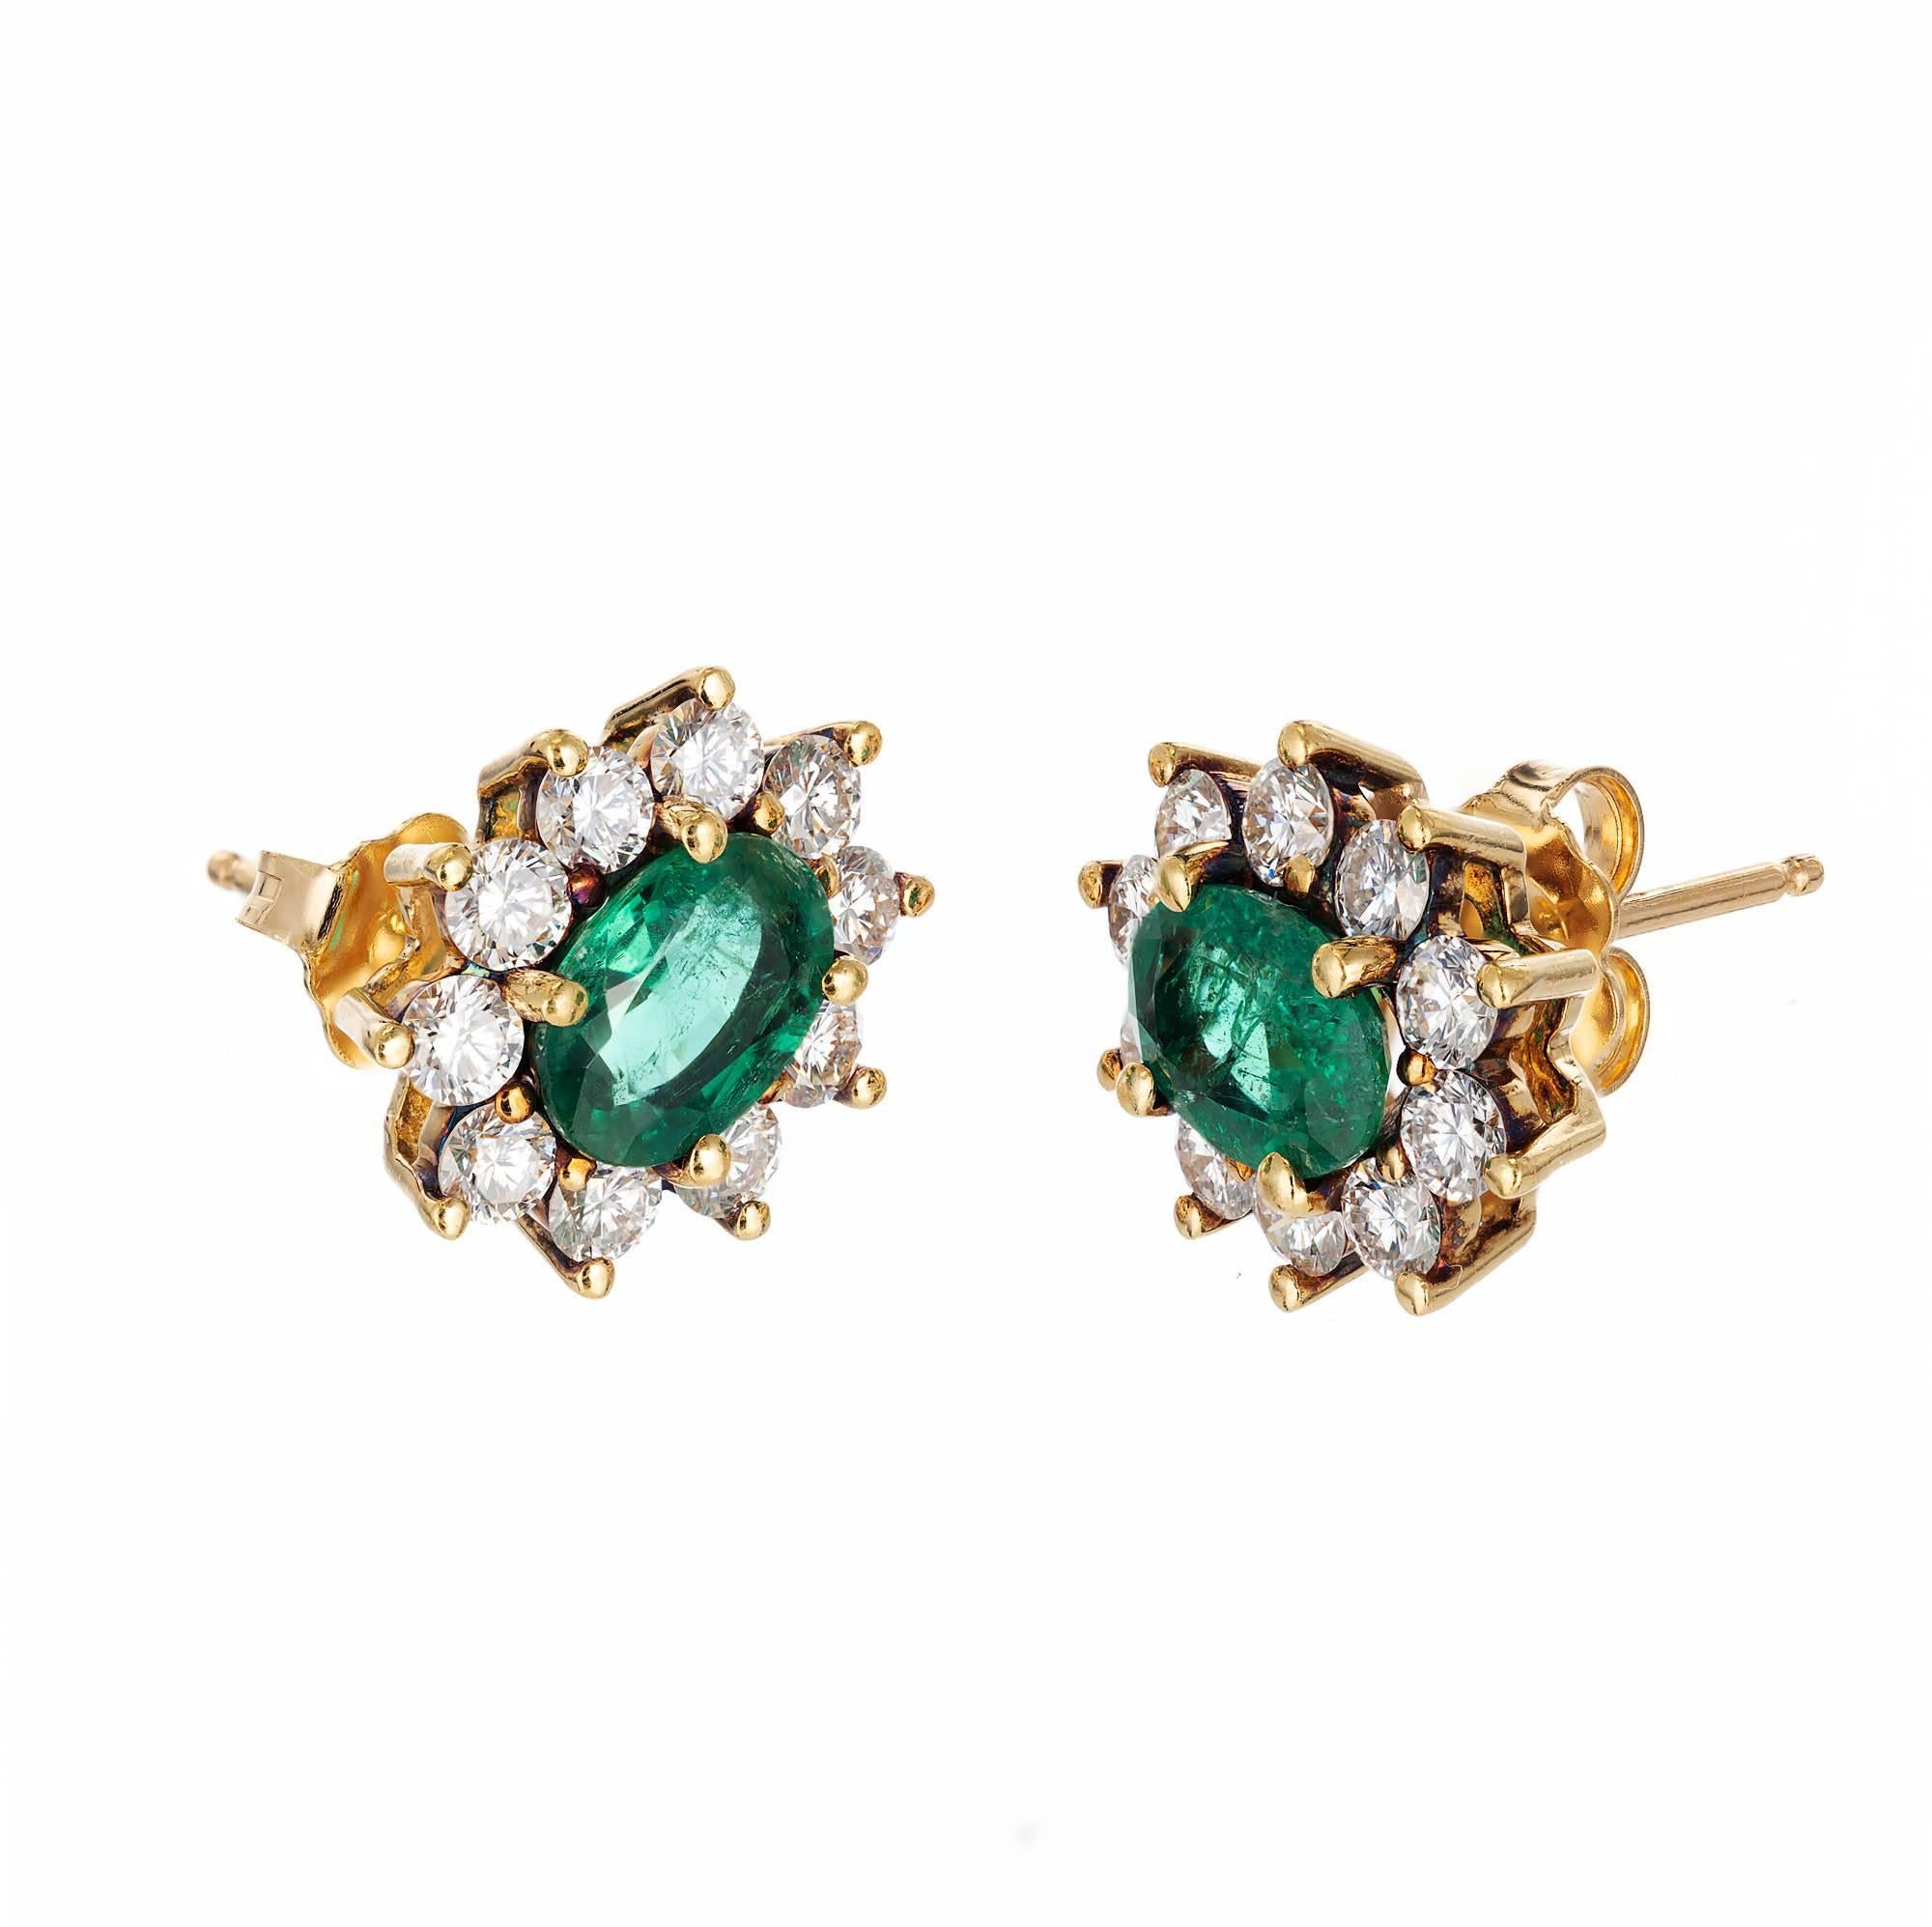 Genuine bright green Colombian oval emerald and diamond halo stud earrings.  18k yellow gold classic pierced earrings with F, VS well cut diamonds. Emeralds are very clear with slight inclusions.

2 oval emeralds approx. total weight 1.75cts.
20